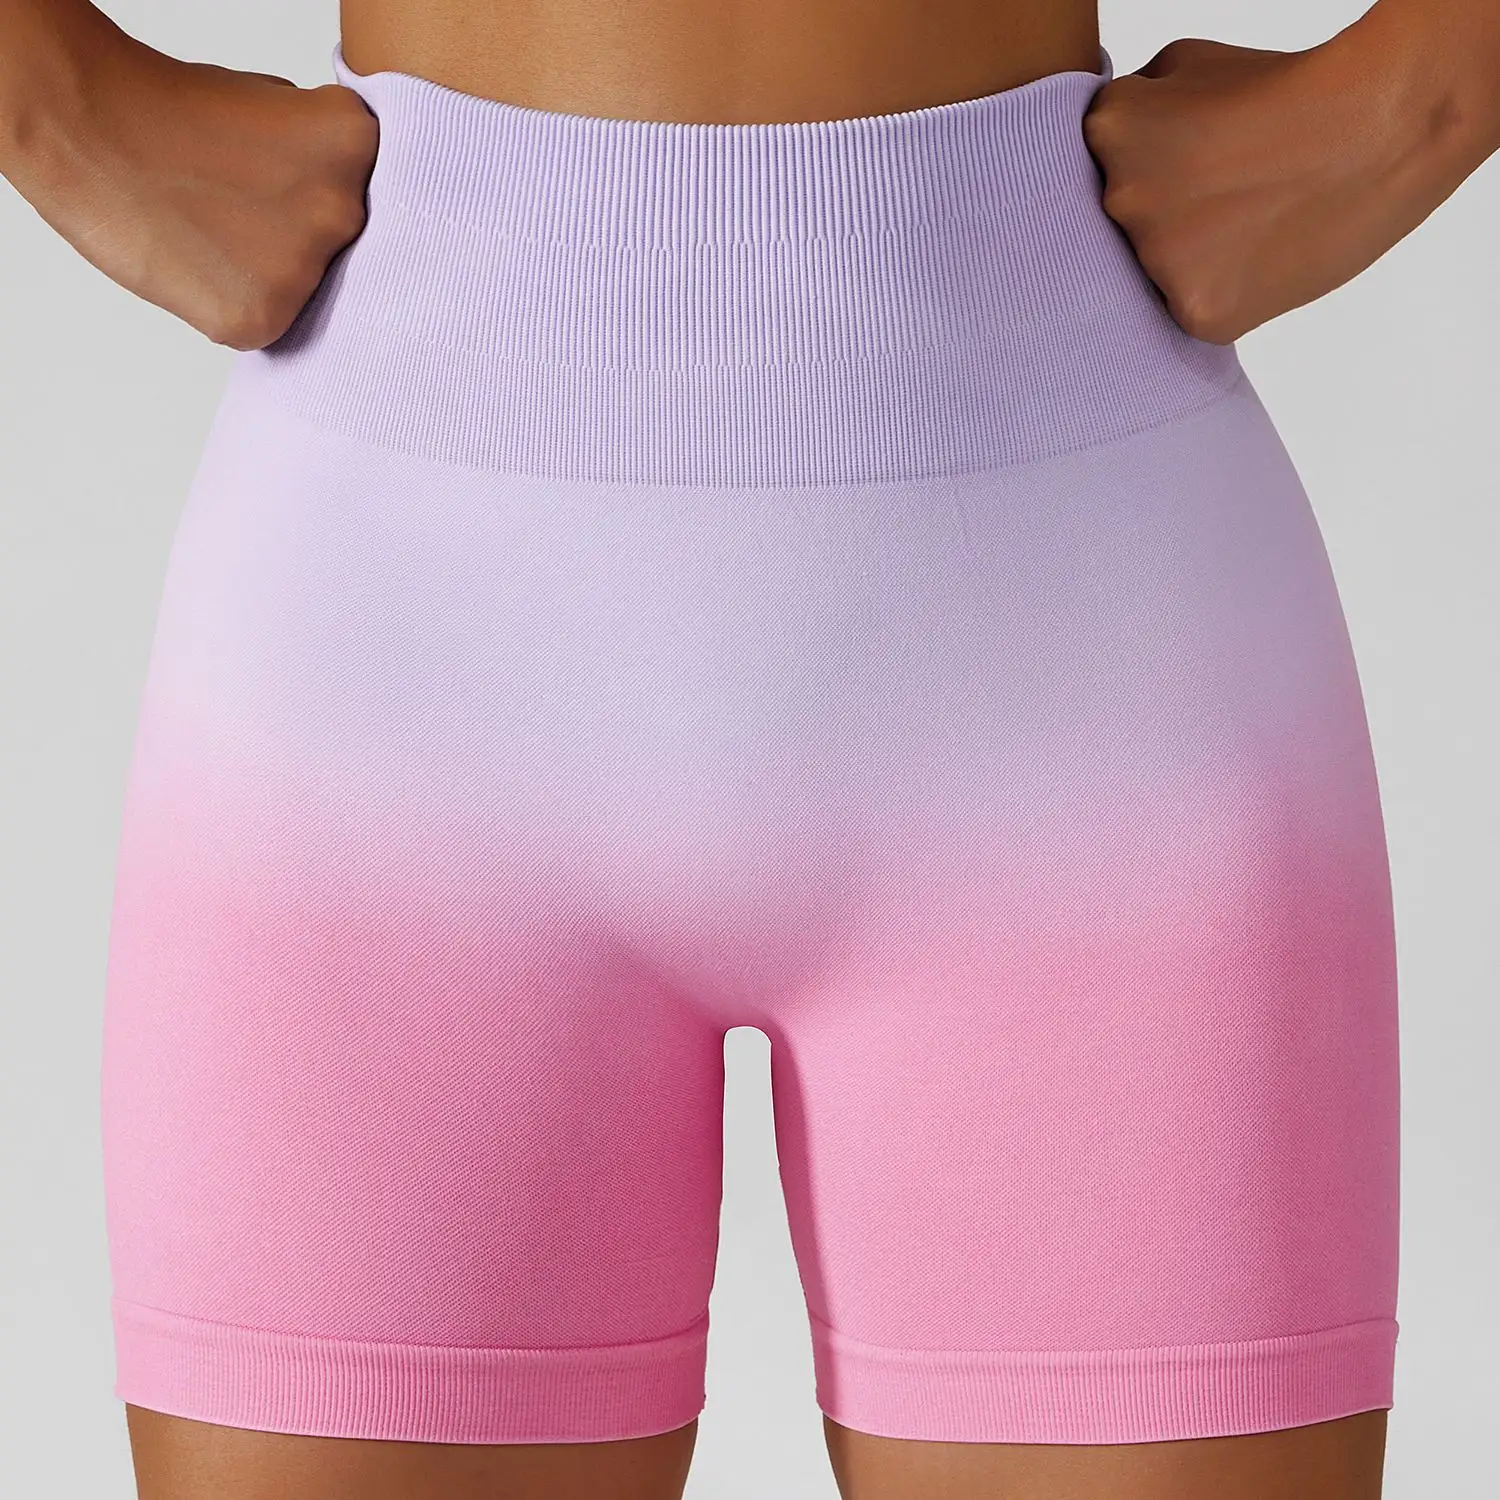 Women's High-Waisted Seamless Compression Biker Shorts Tie Dye Ideal for Gym Yoga Running and Fitness